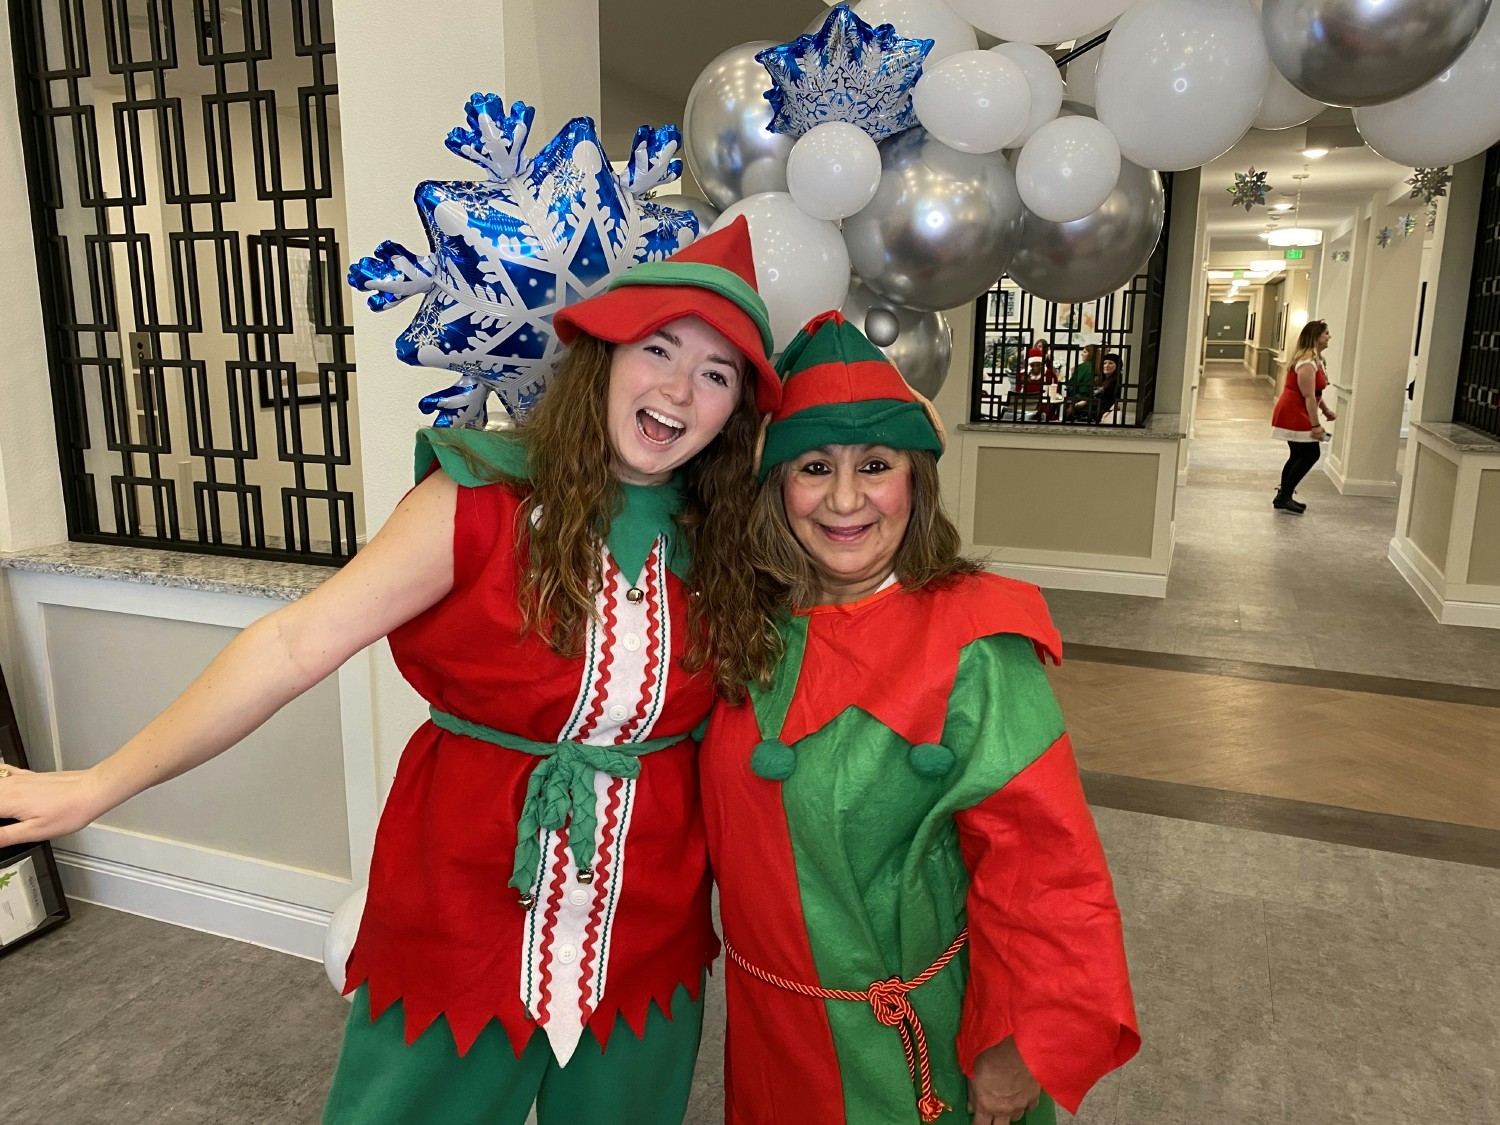 Christmas party costume contest! The cutest elves!